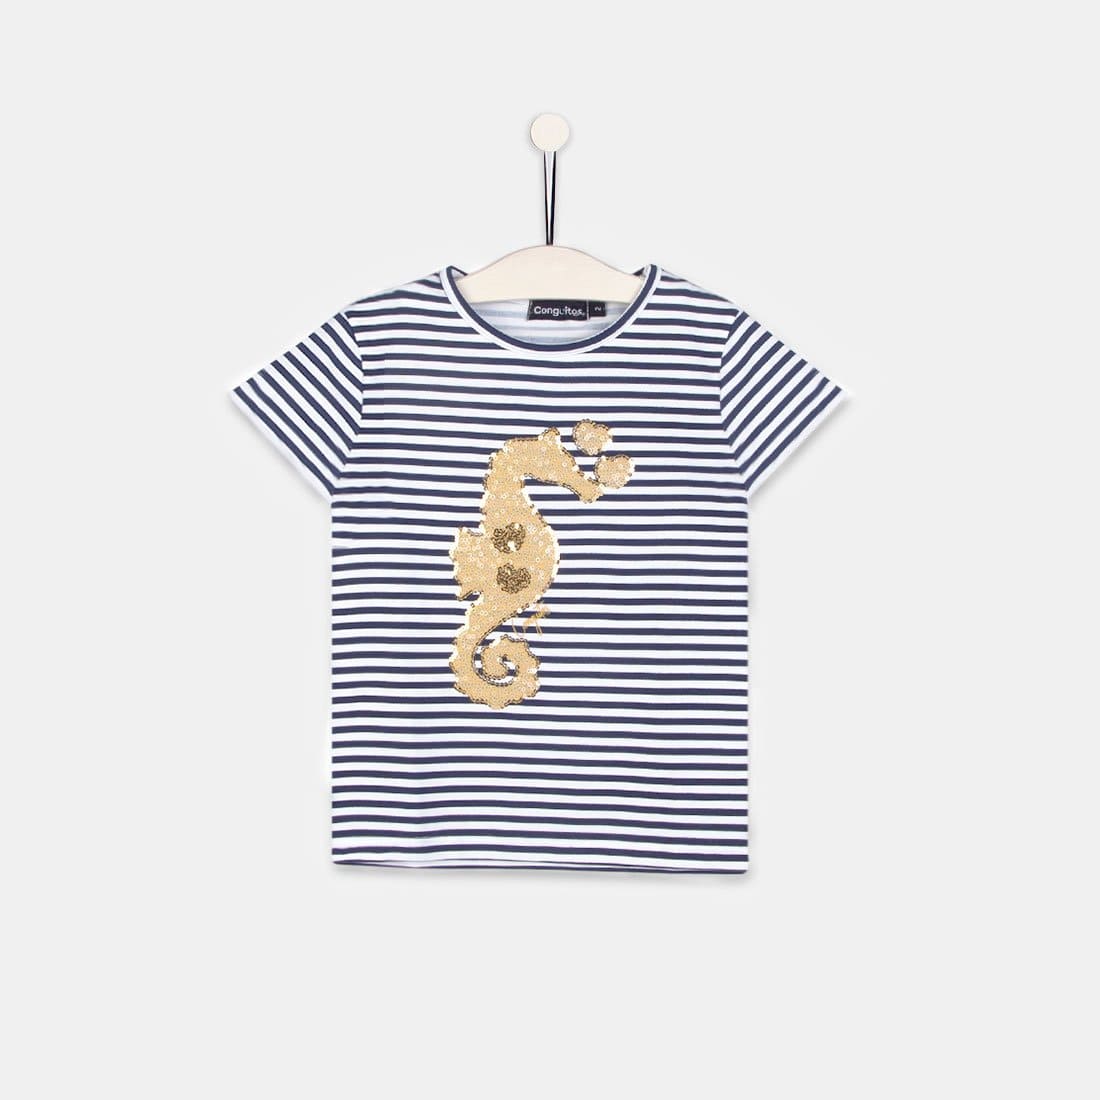 CONGUITOS TEXTIL Clothing Girls "Seahorse" Navy Glow in the Dark T-Shirt